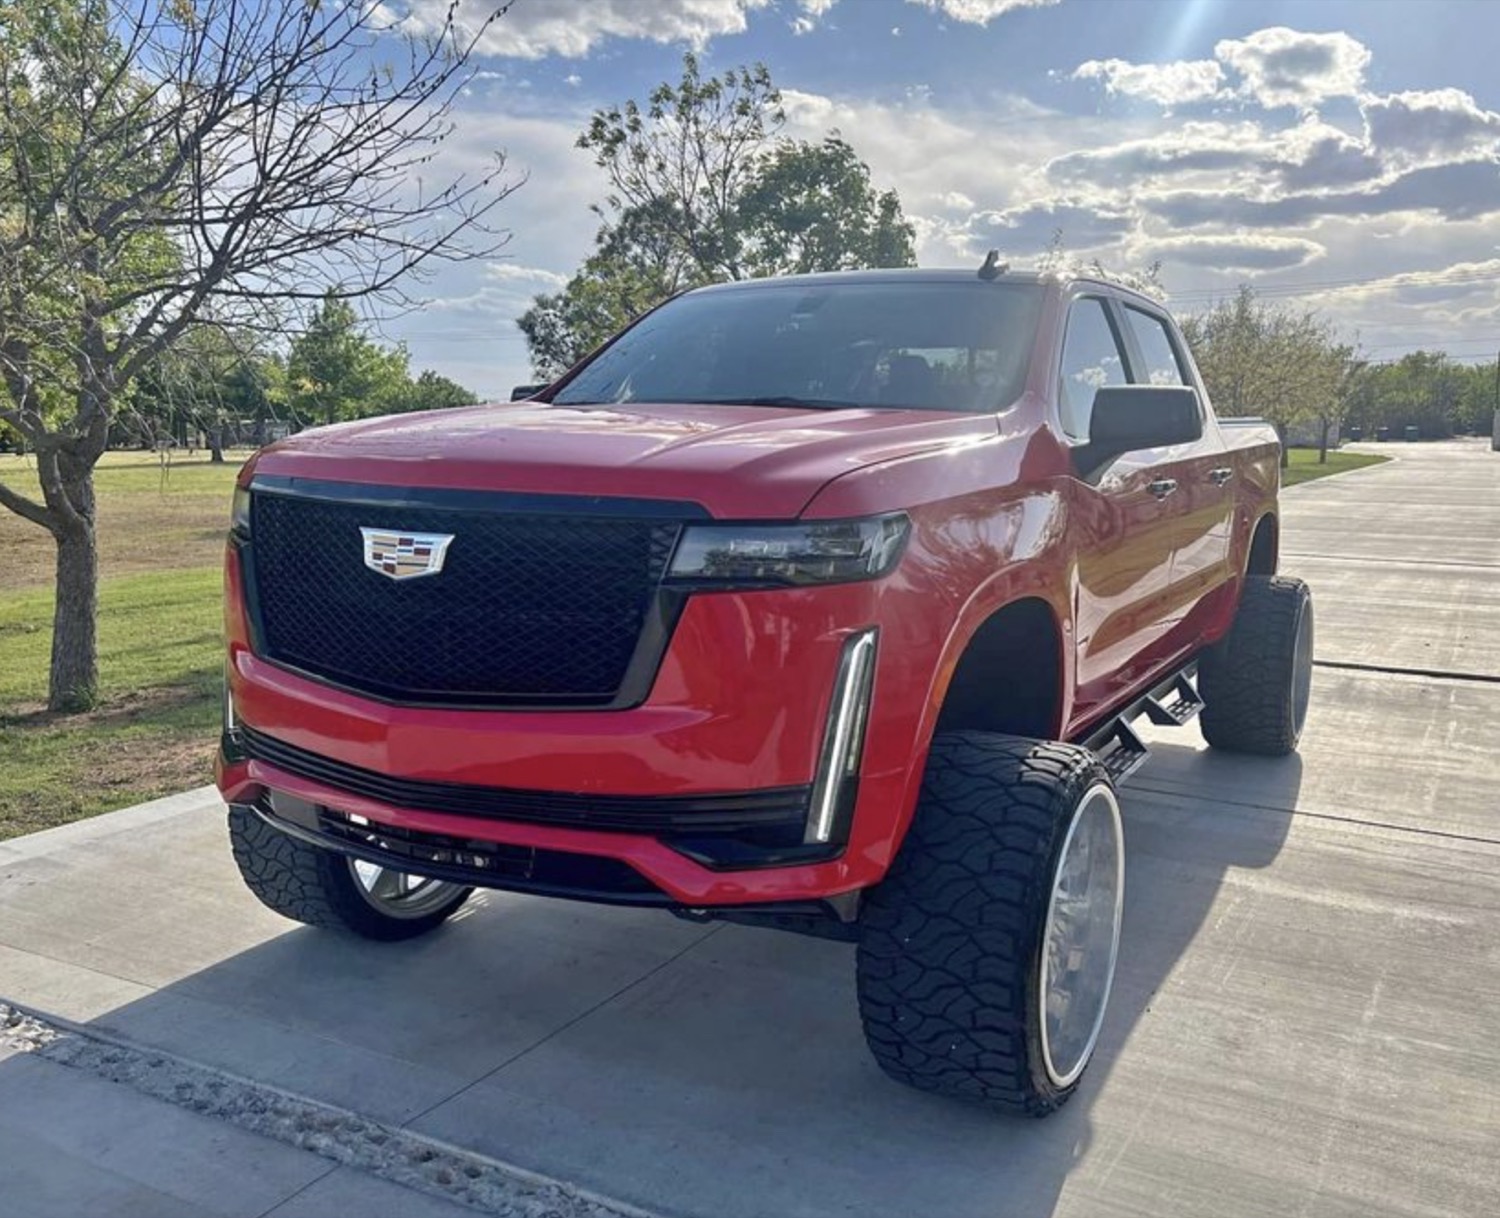 2021 Chevy Silverado Lt Trail Boss With Cadillac Escalade Front End Up